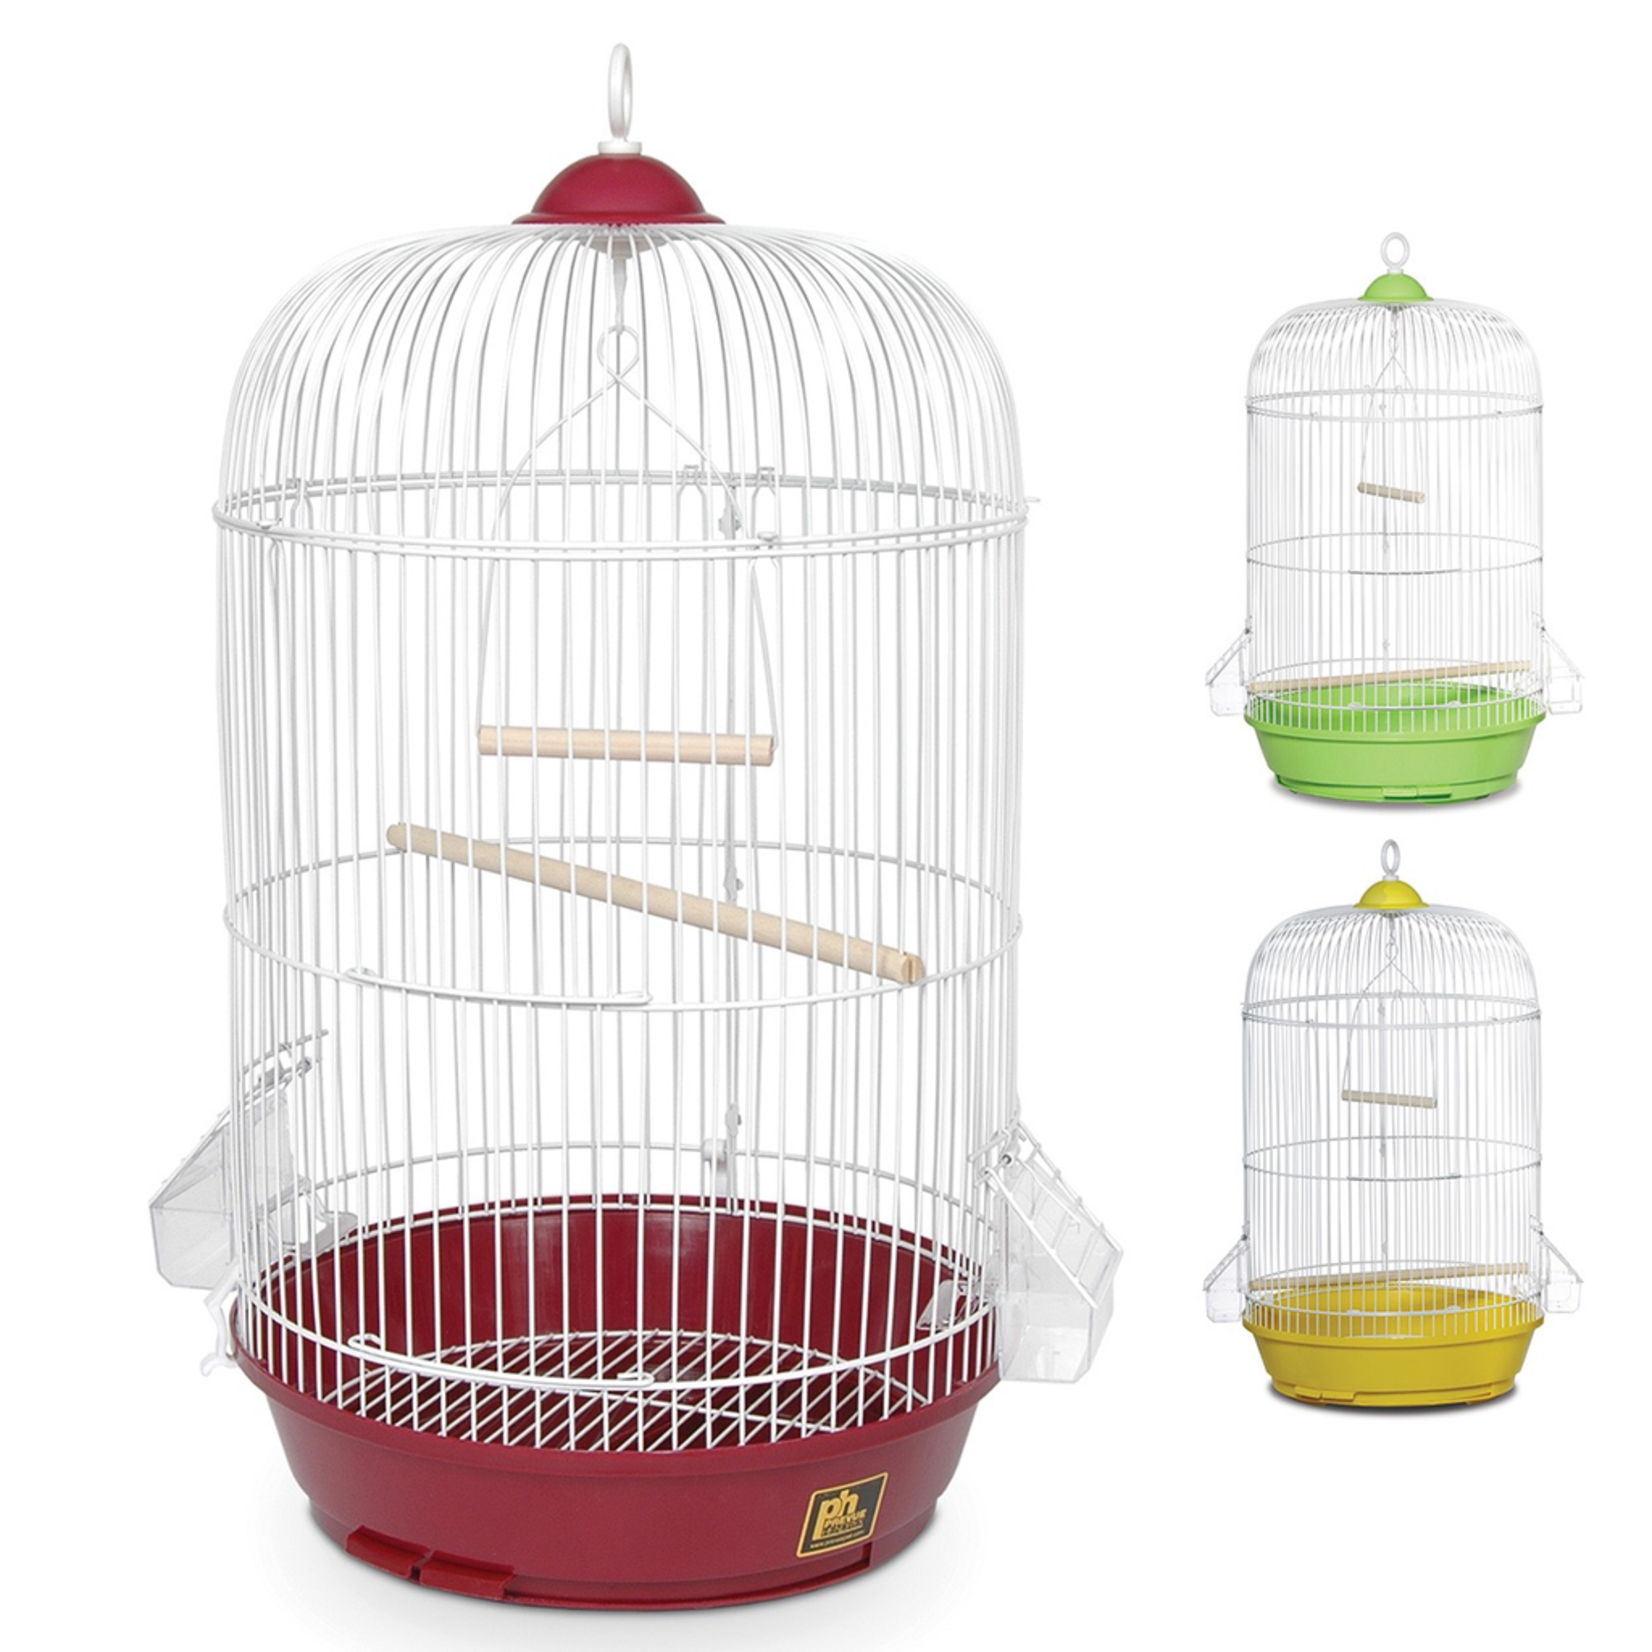 PREVUE PET (W) PH Small Round Bird Cage - Assorted Colors - Multipack - 12.75" dia x 26"